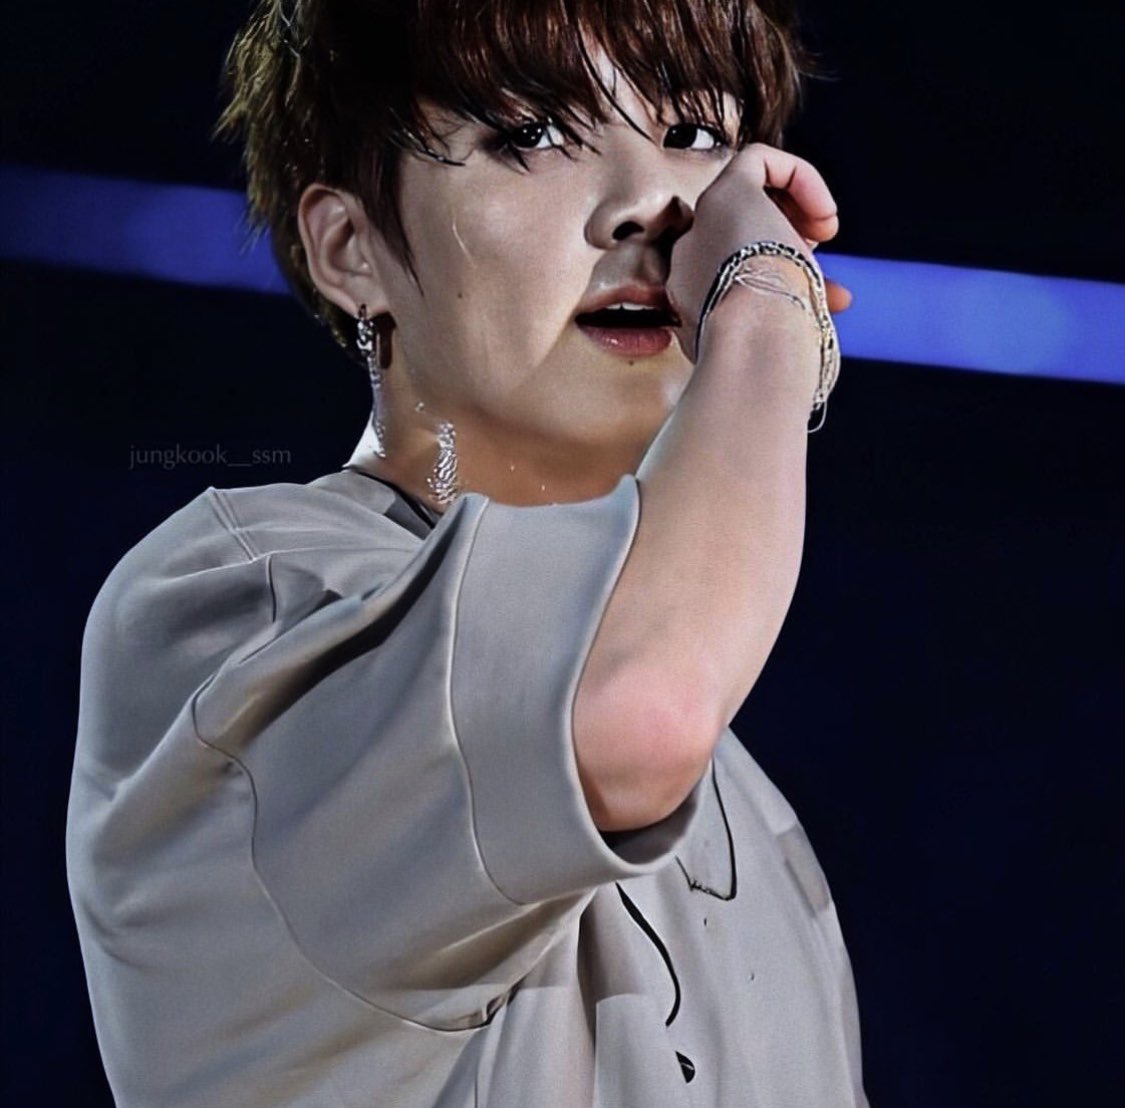 A thread of jungkook’s unwhitewashed sweaty pics, cause why not 